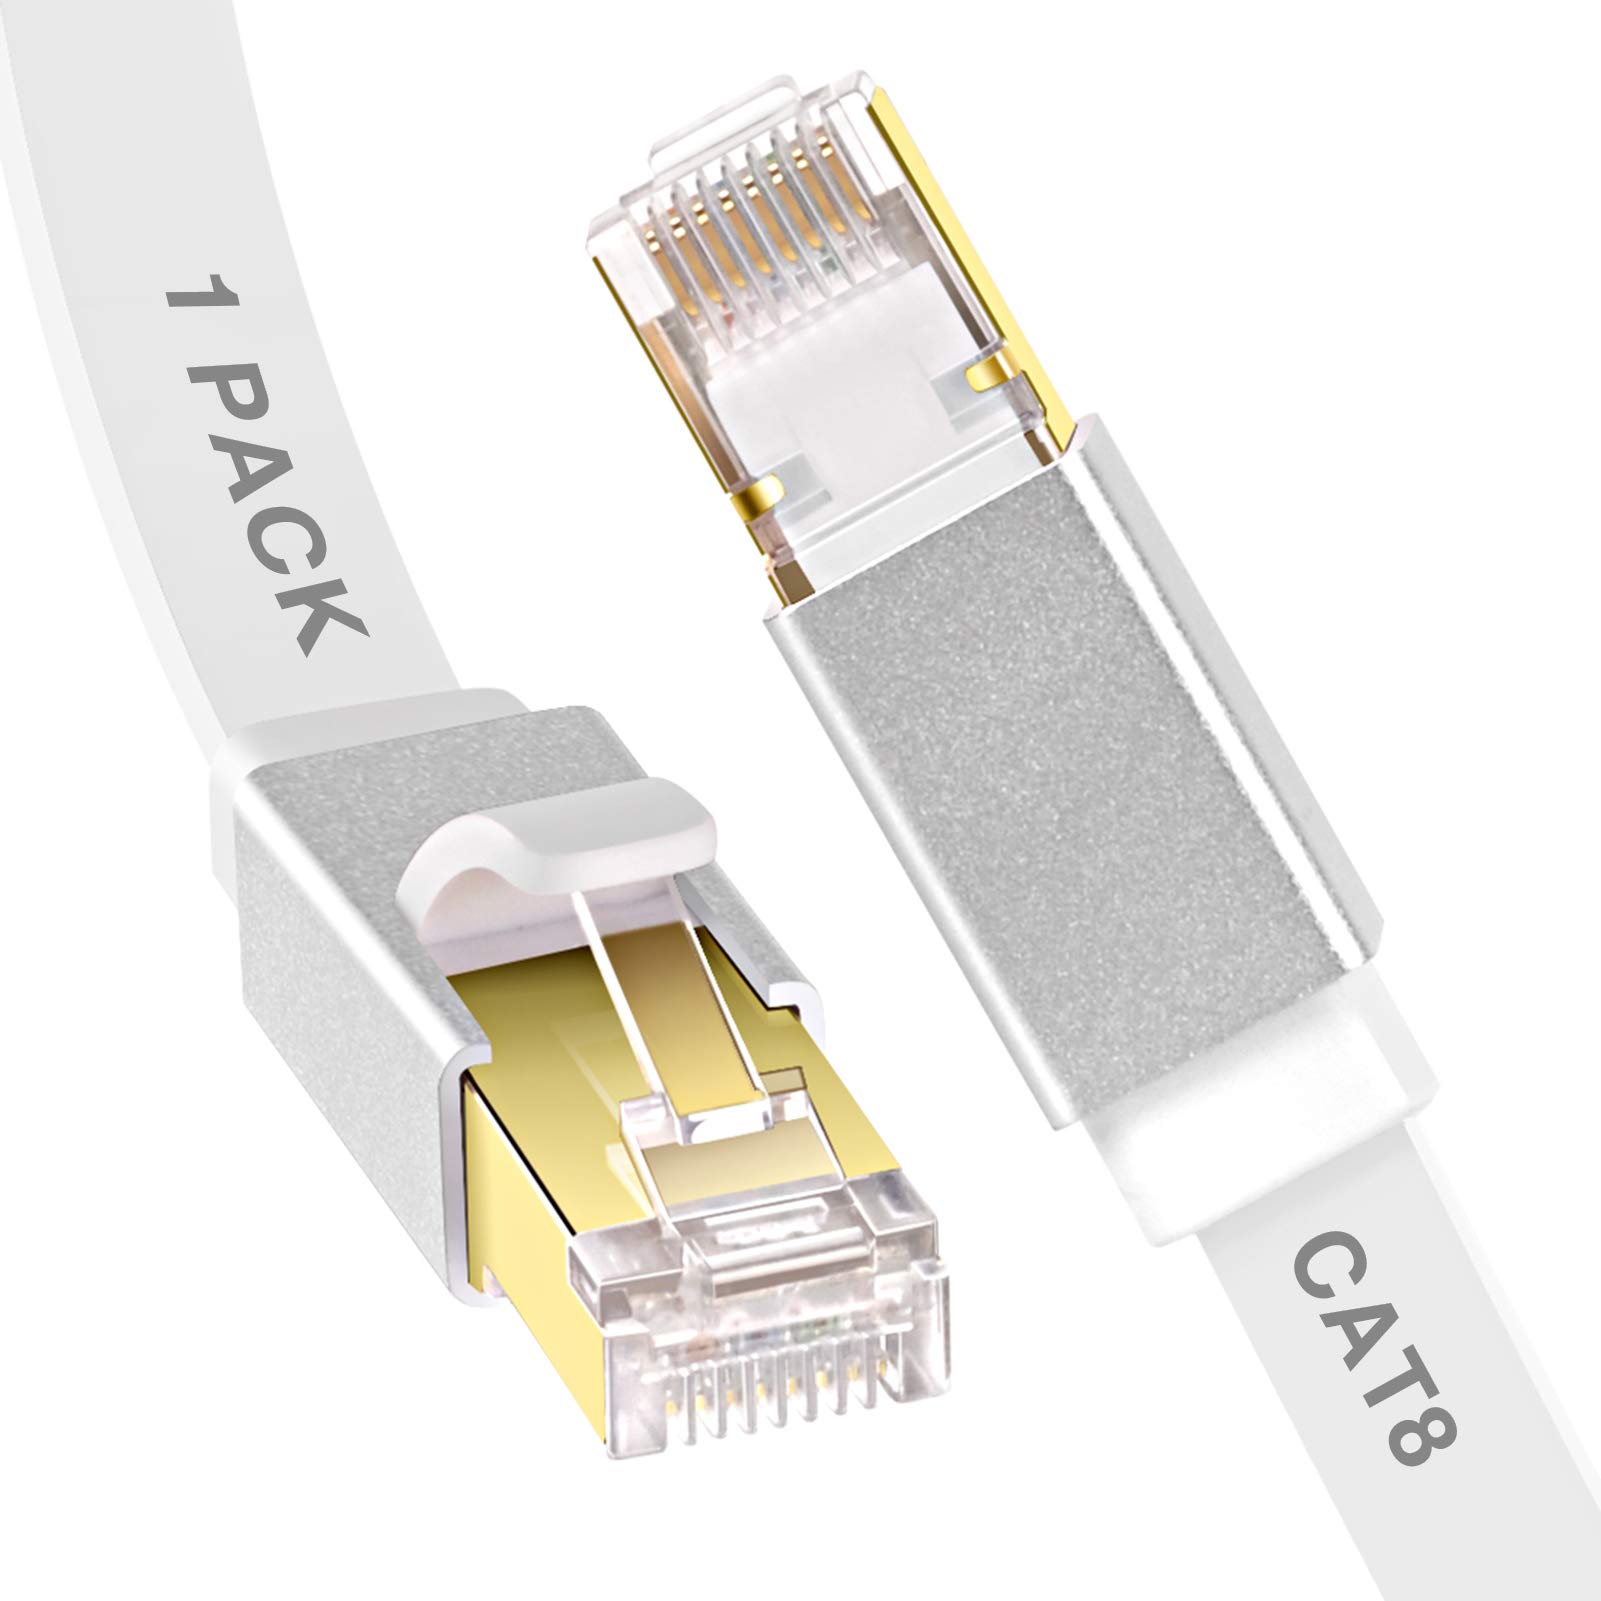 Ensure that the Ethernet cable is securely connected to both the computer and the modem/router
If possible, try using a different Ethernet cable to rule out any cable-related issues